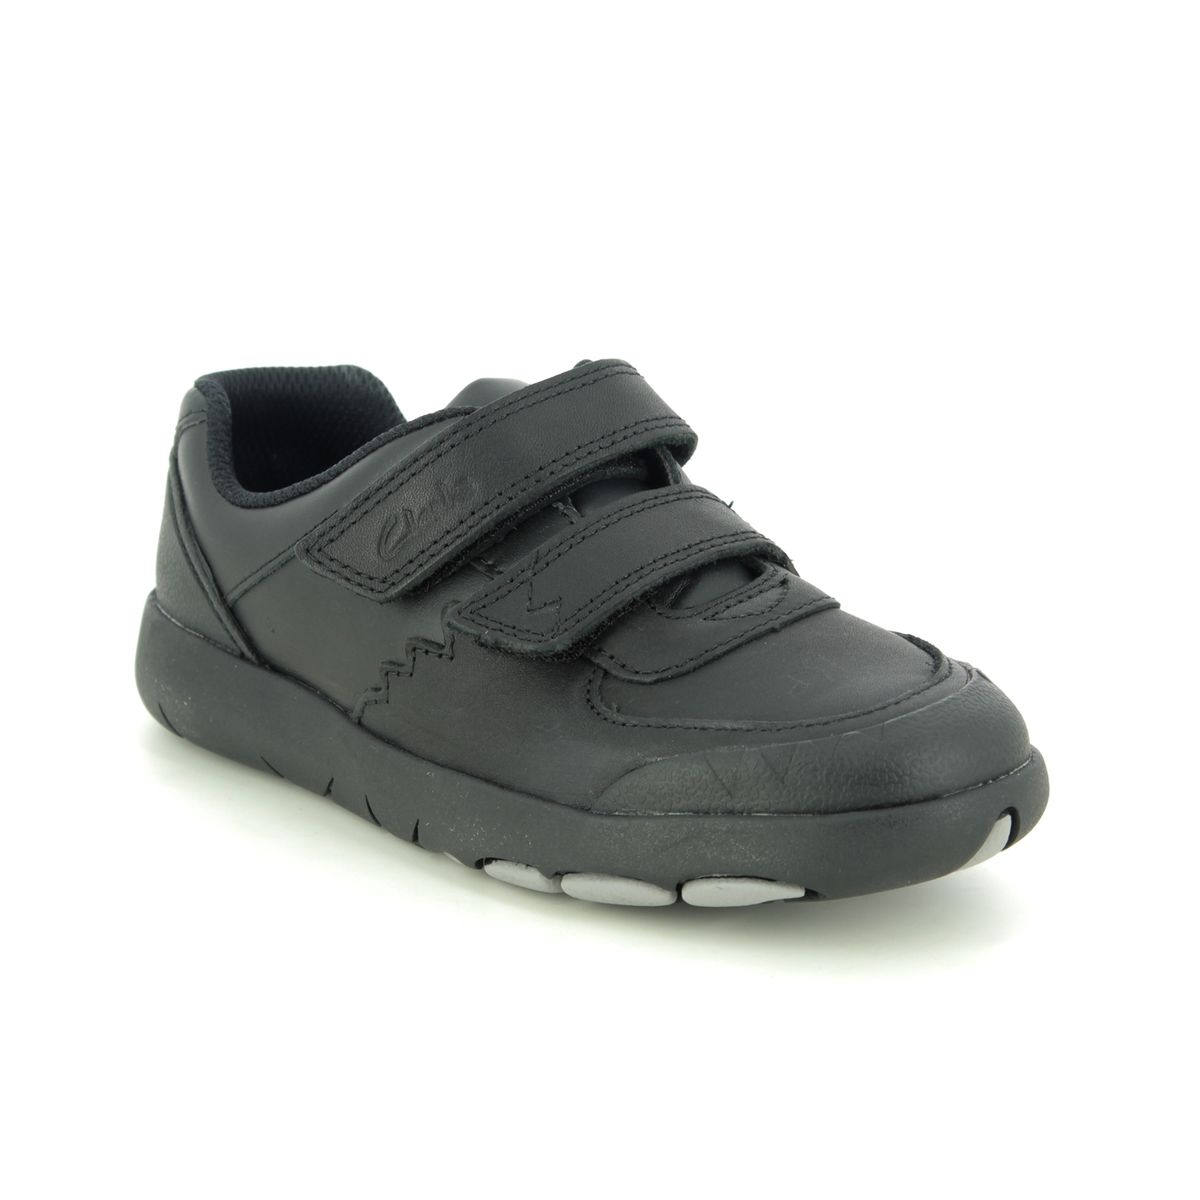 Clarks Rex Pace K Black leather Kids Boys Shoes 4704-48H in a Plain Leather in Size 10